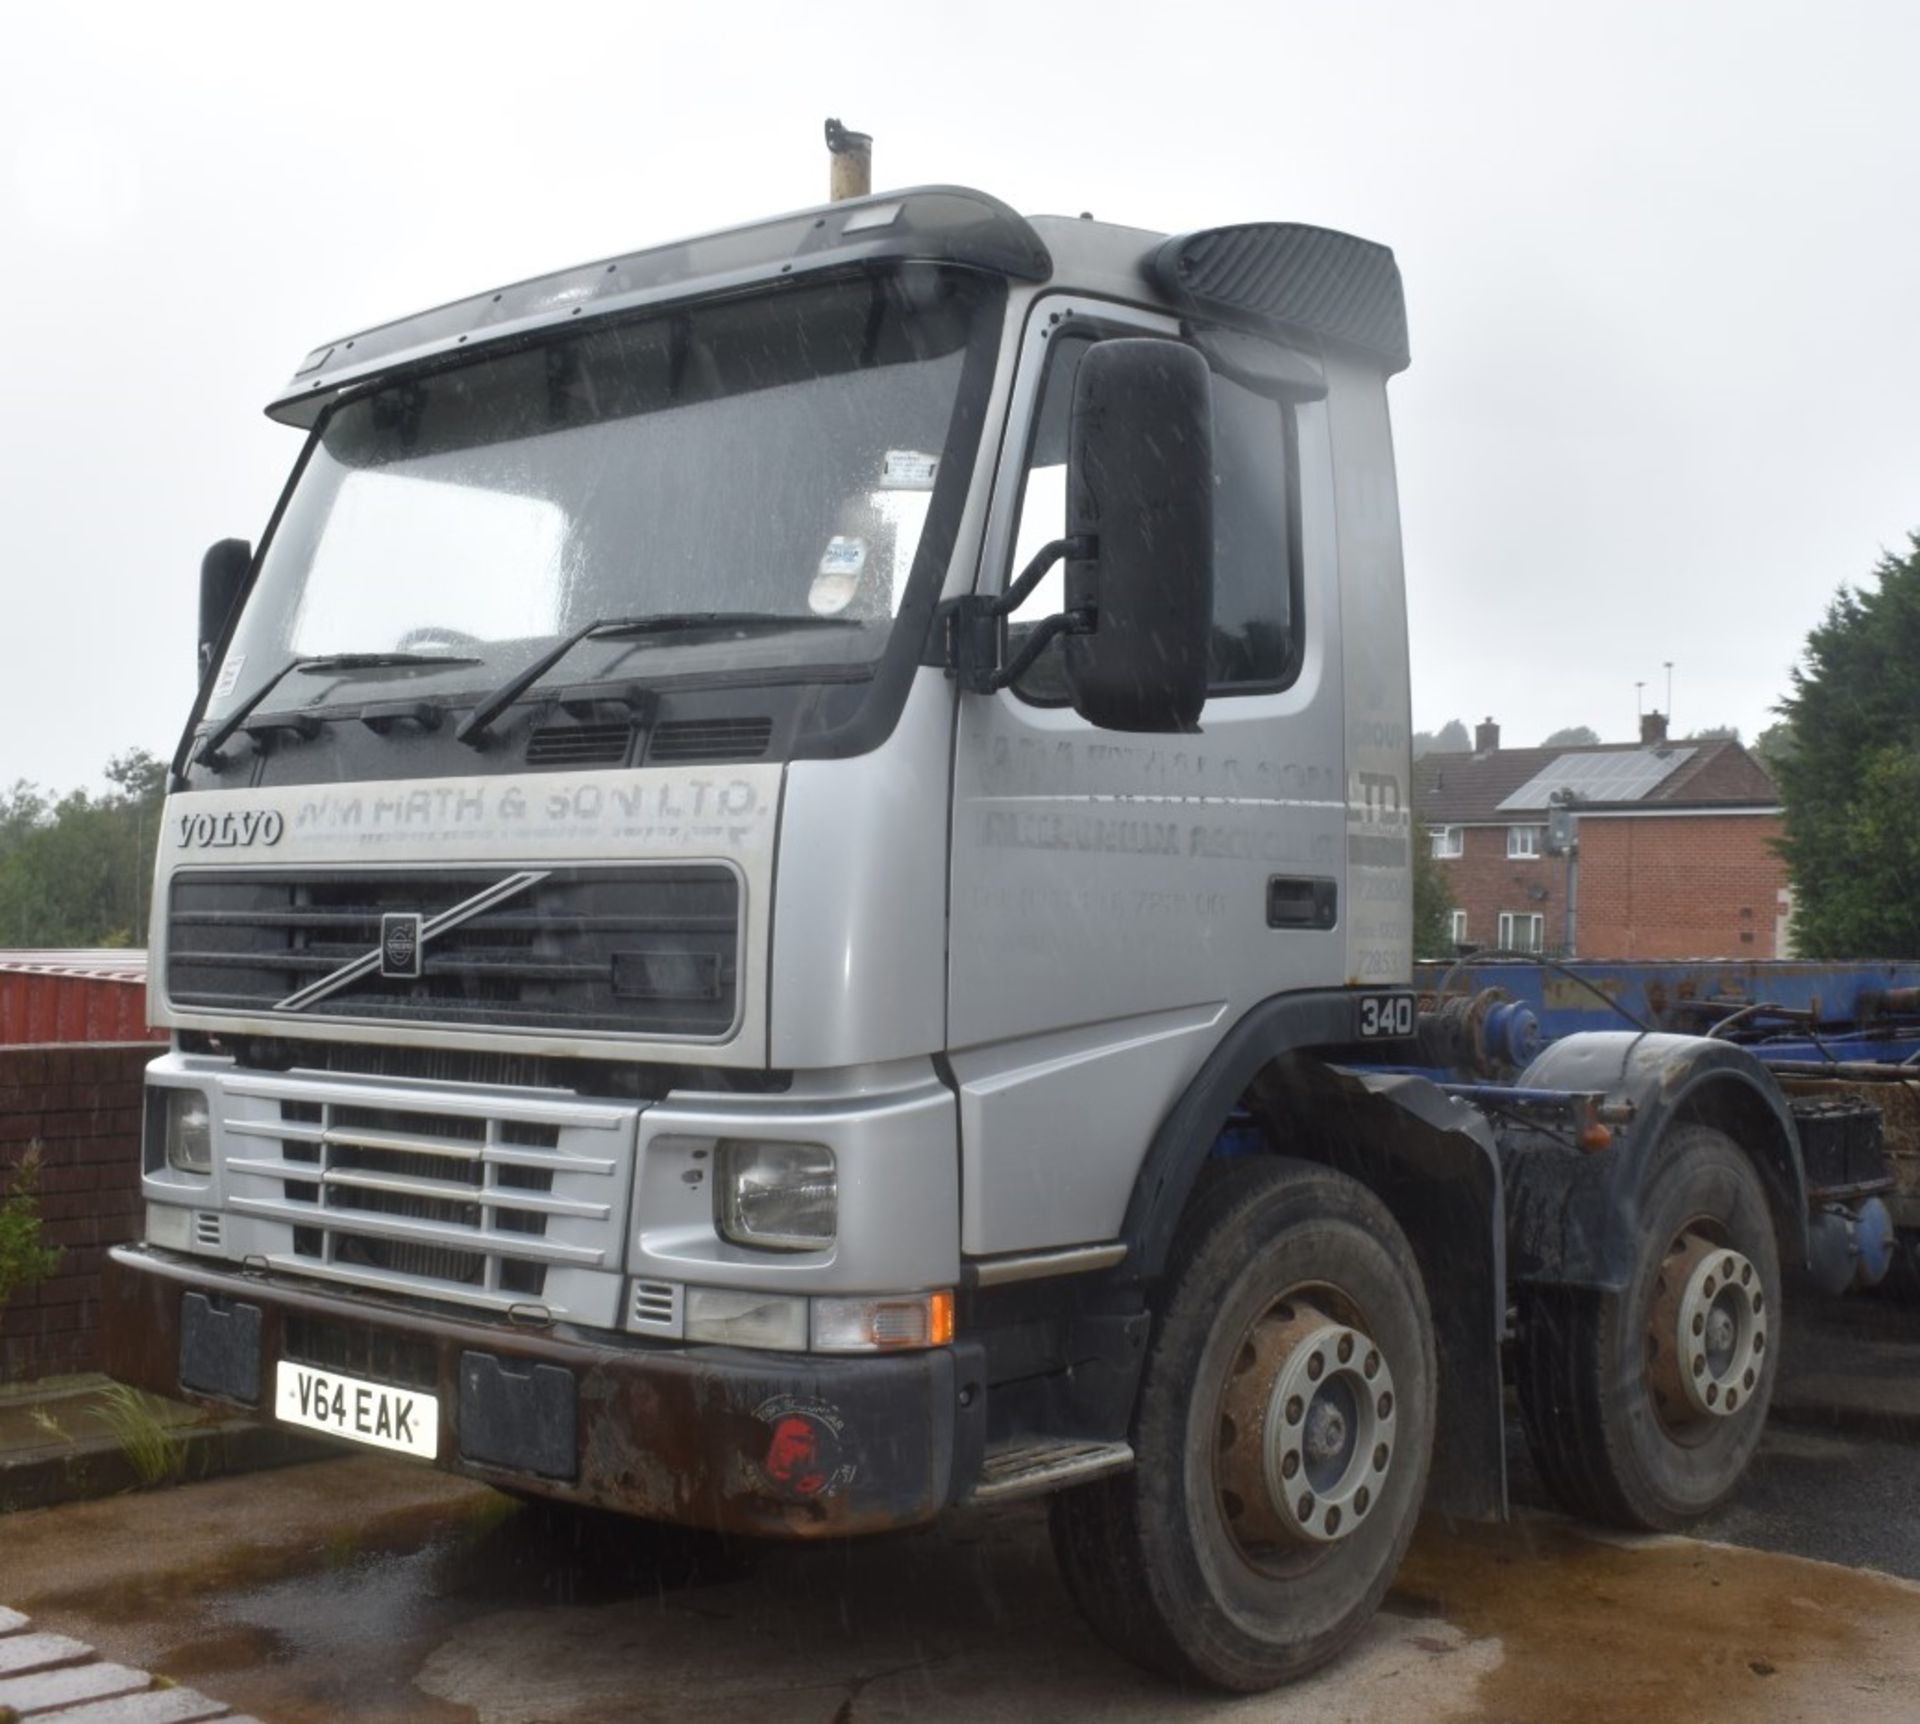 1 x Volvo 340 Plant Lorry With Tipper Chasis and Fitted Winch - CL547 - Location: South Yorkshire. - Image 20 of 25